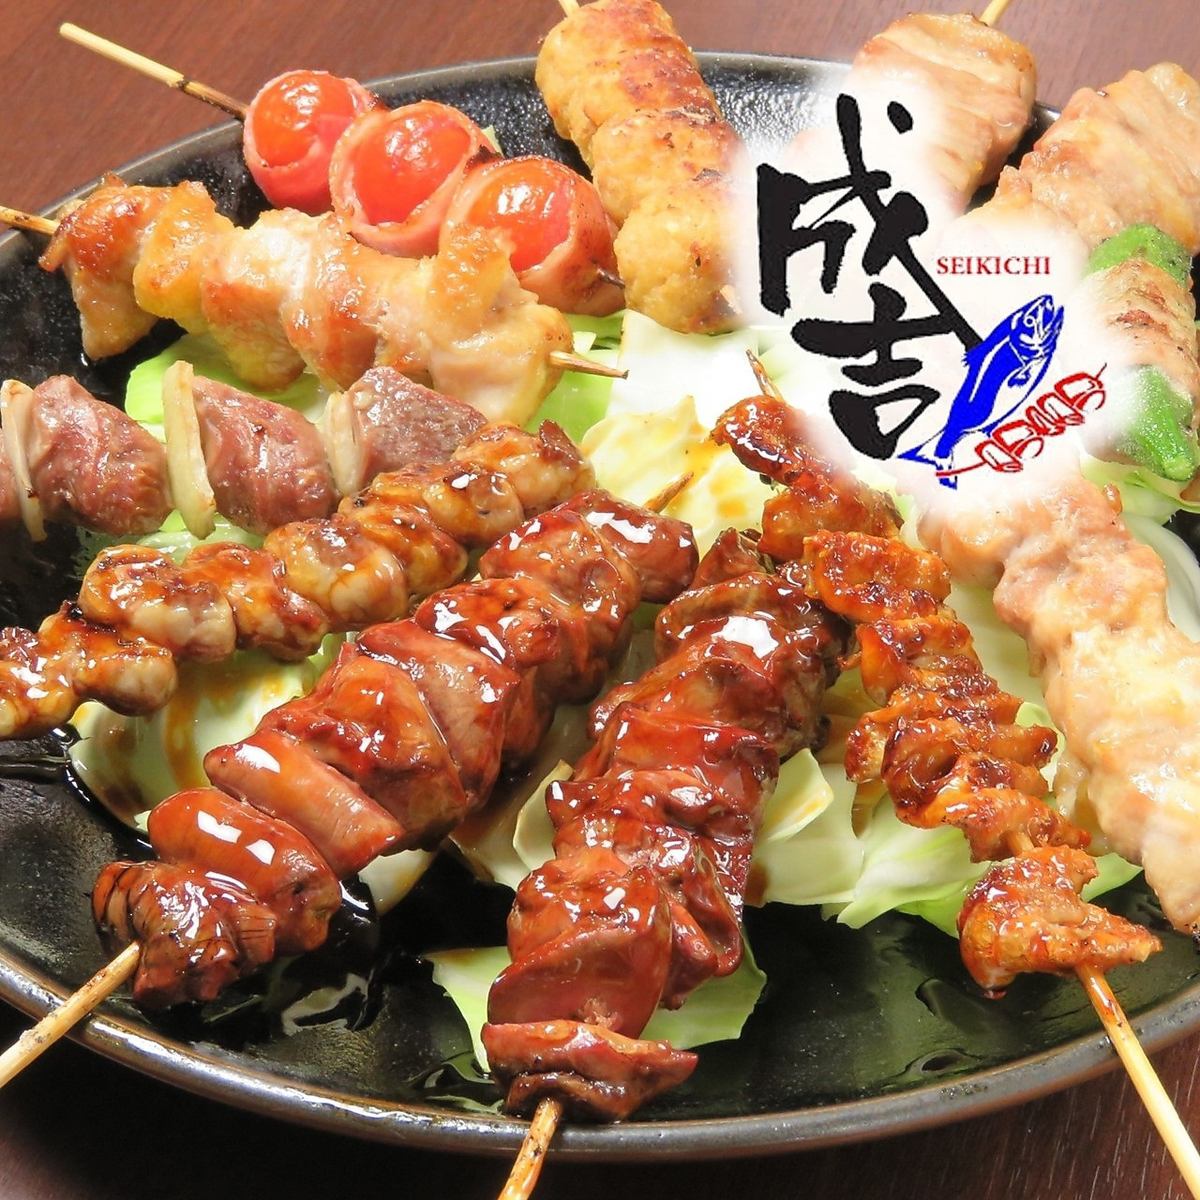 Thanks to you, the 20th anniversary ★ A traditional skewer that is carefully grilled over charcoal, sticking to Kyushu ingredients, starts at 90 yen